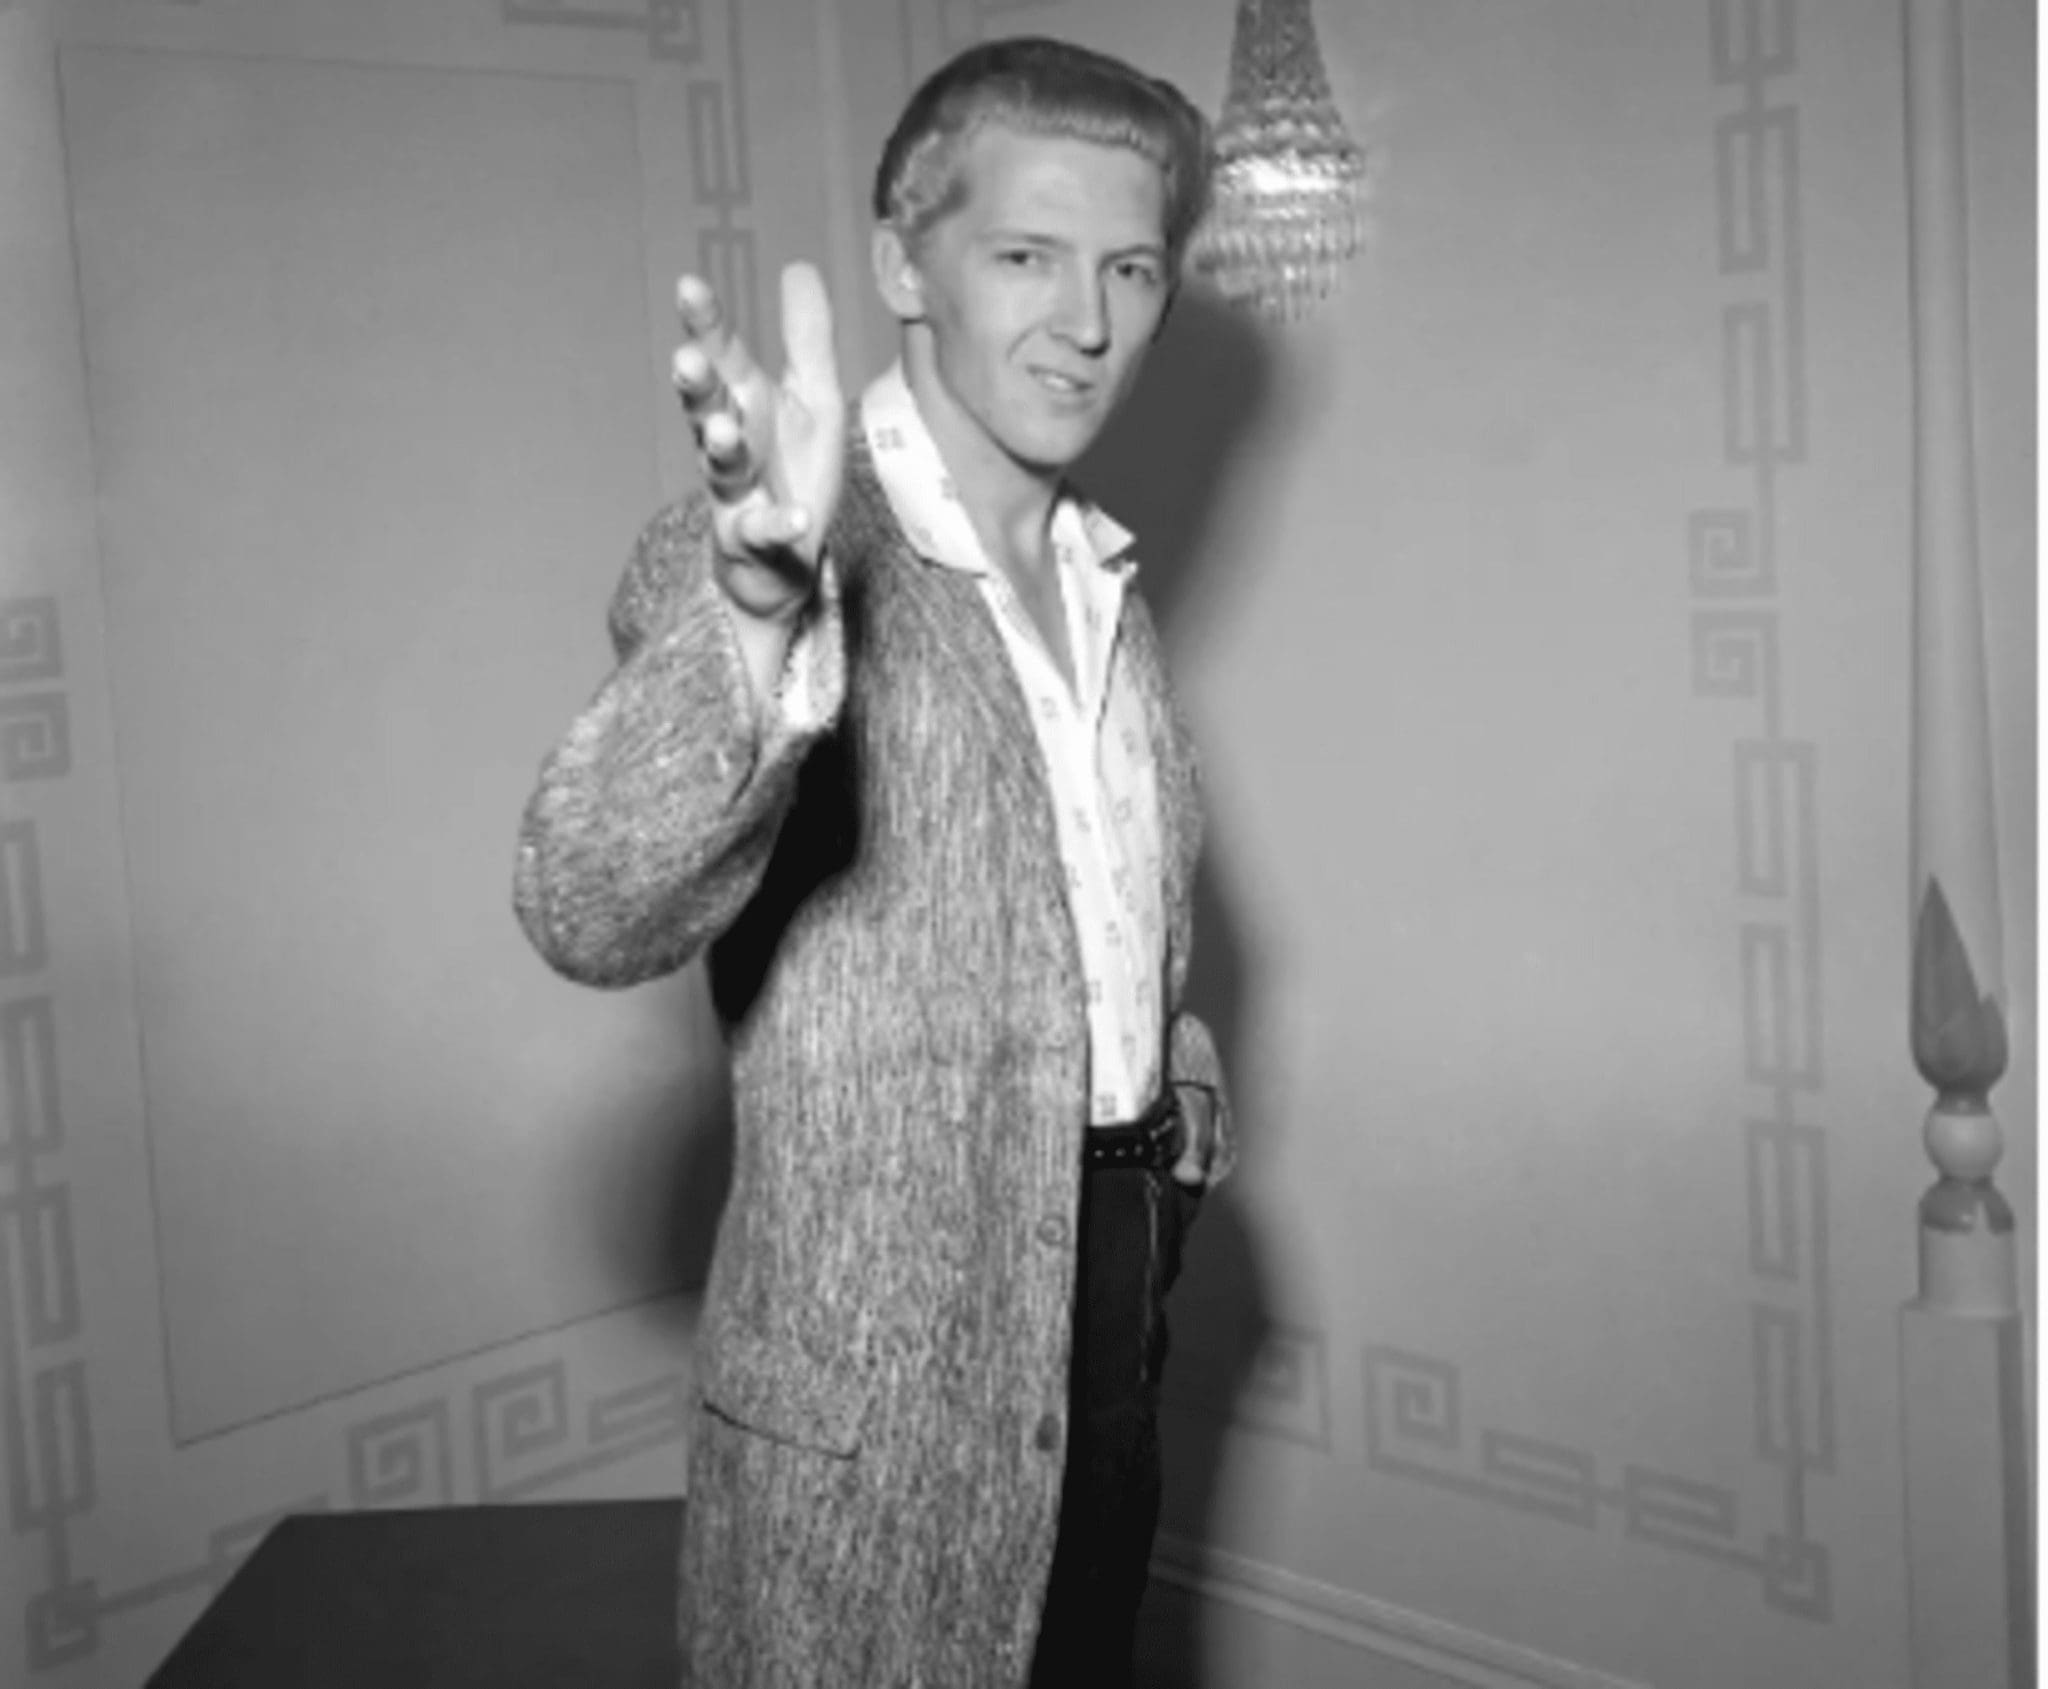 Two Days After The Hoax, 87-Year-Old Singer Jerry Lee Lewis Passed Away